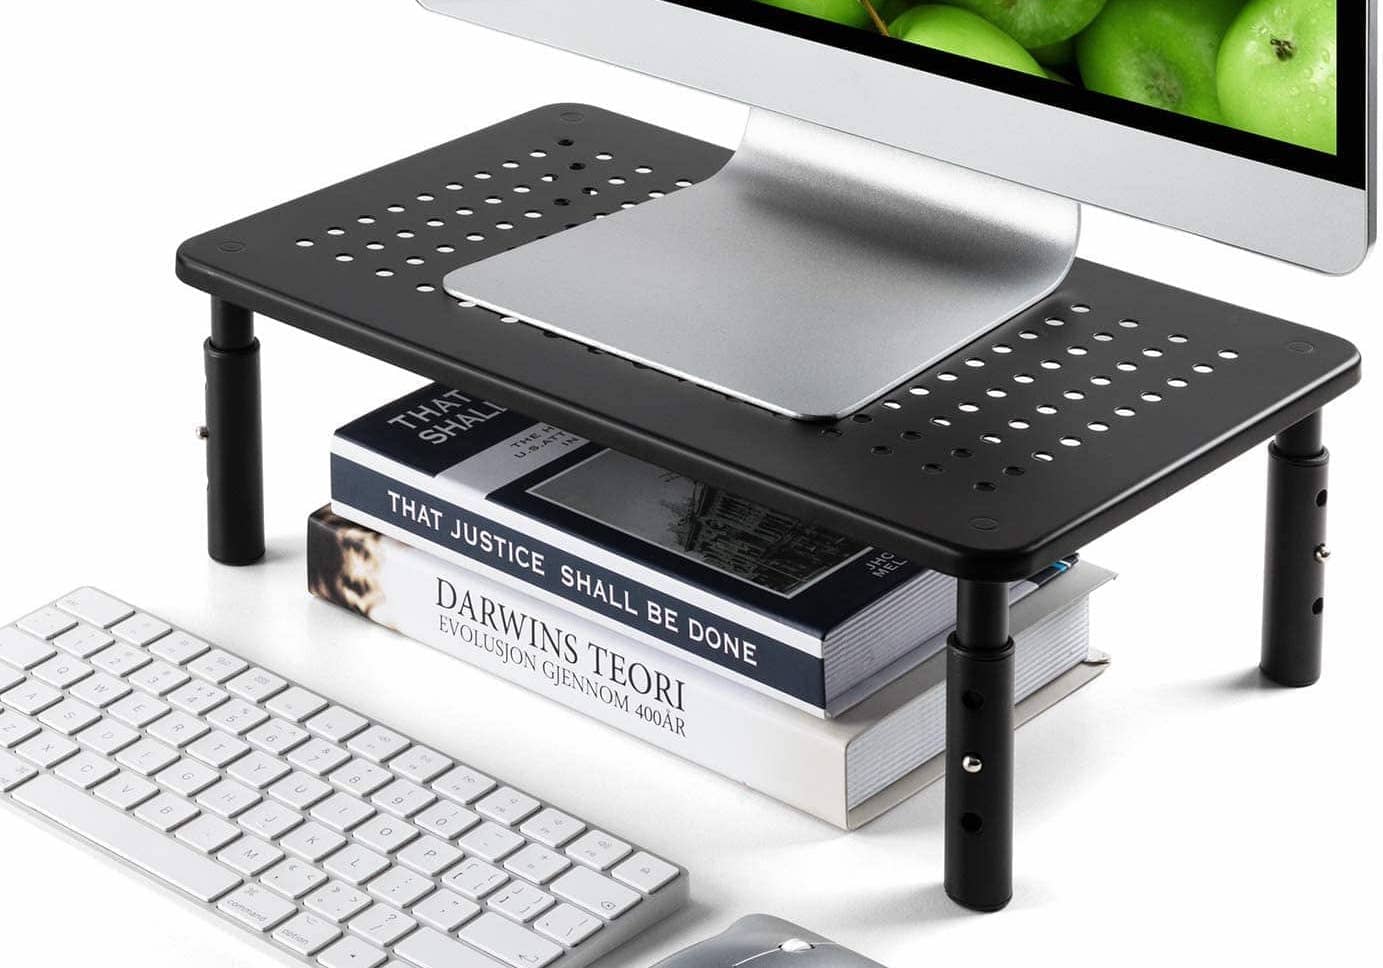 Loryergo monitor stand review